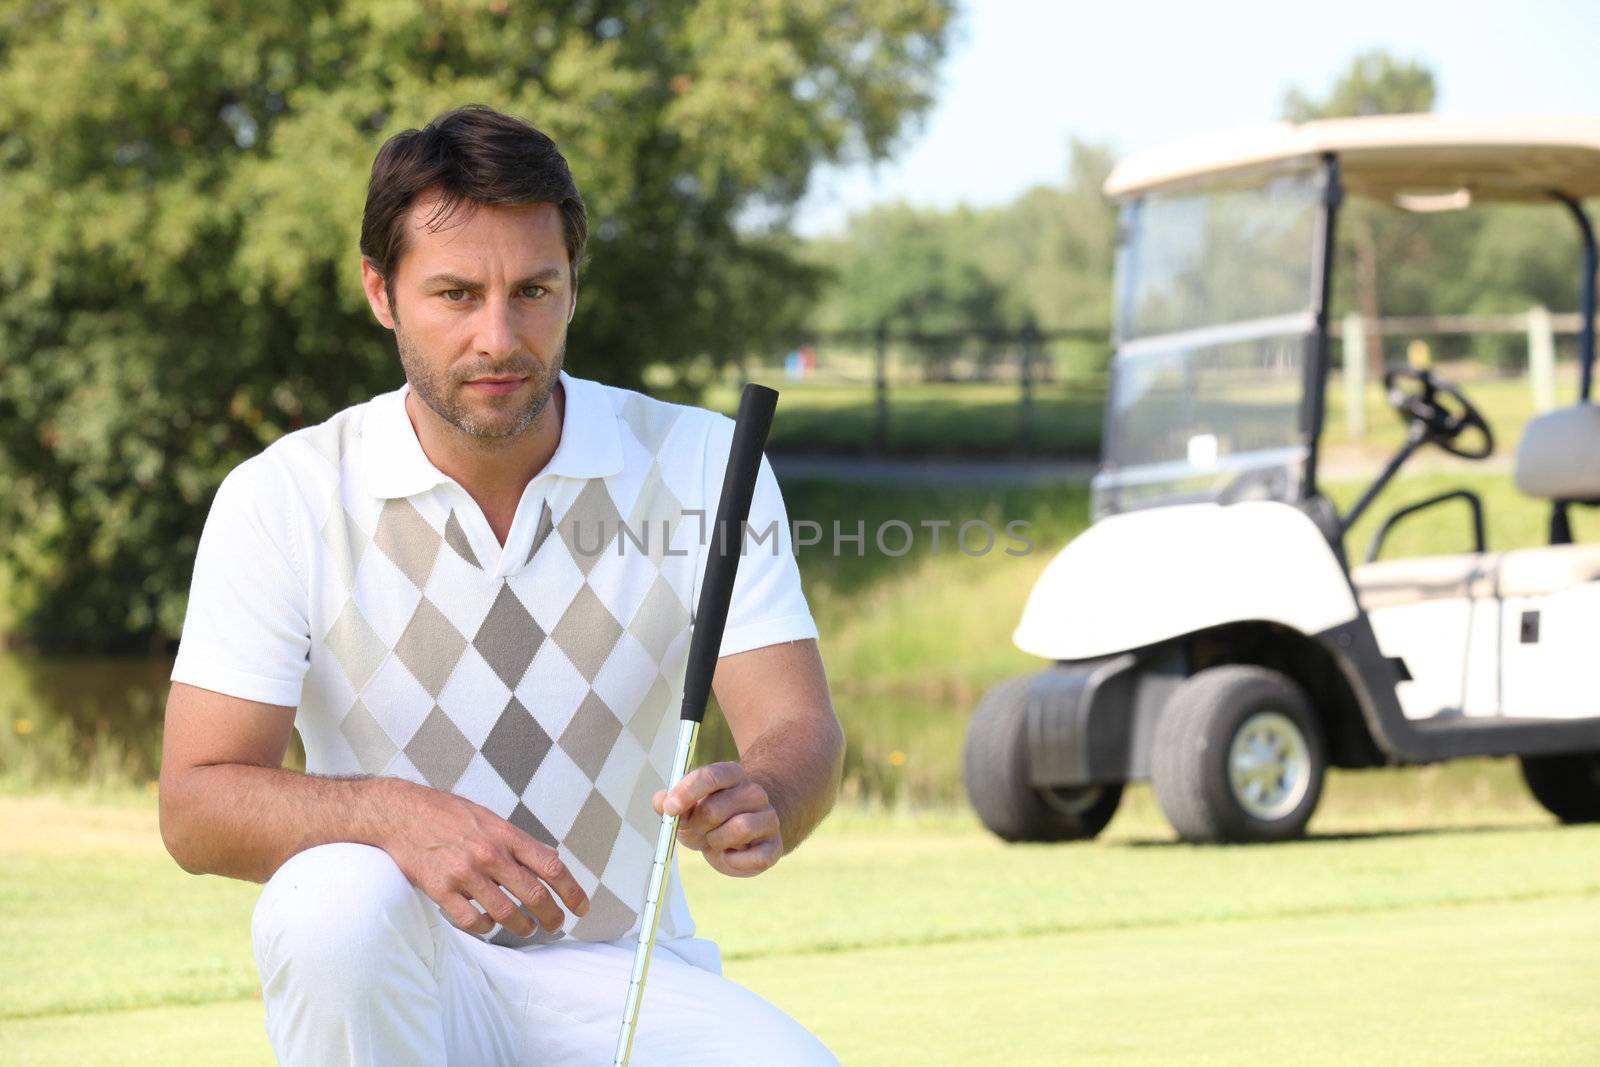 Golfer looking at the lie of his ball by phovoir